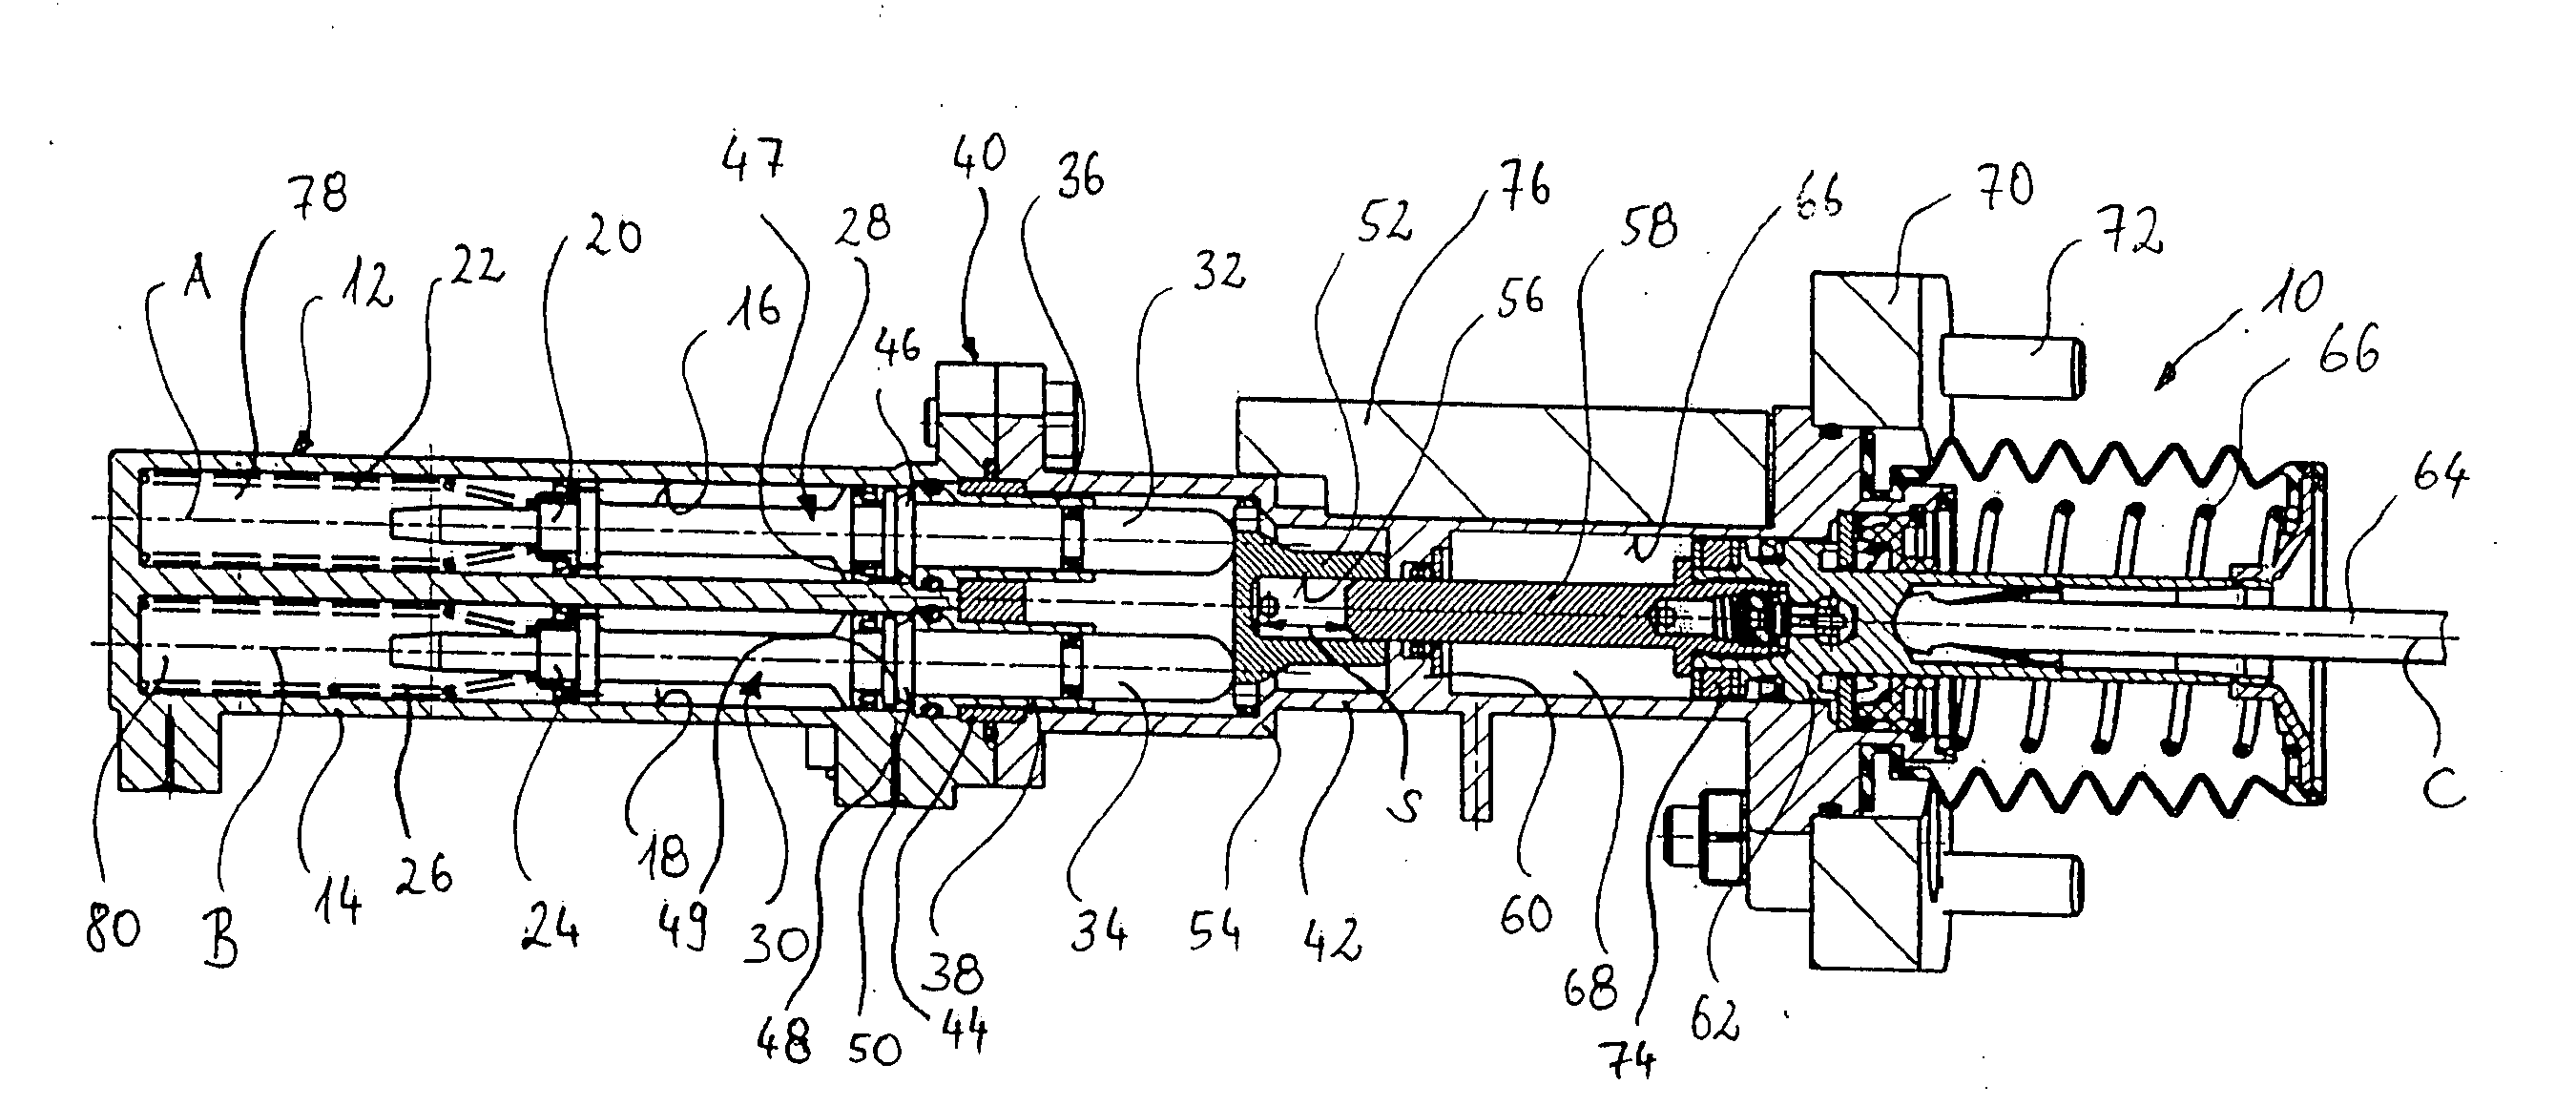 Master Cylinder System for an Automotive Hydraulic Brake System and Automotive Hydraulic Brake System